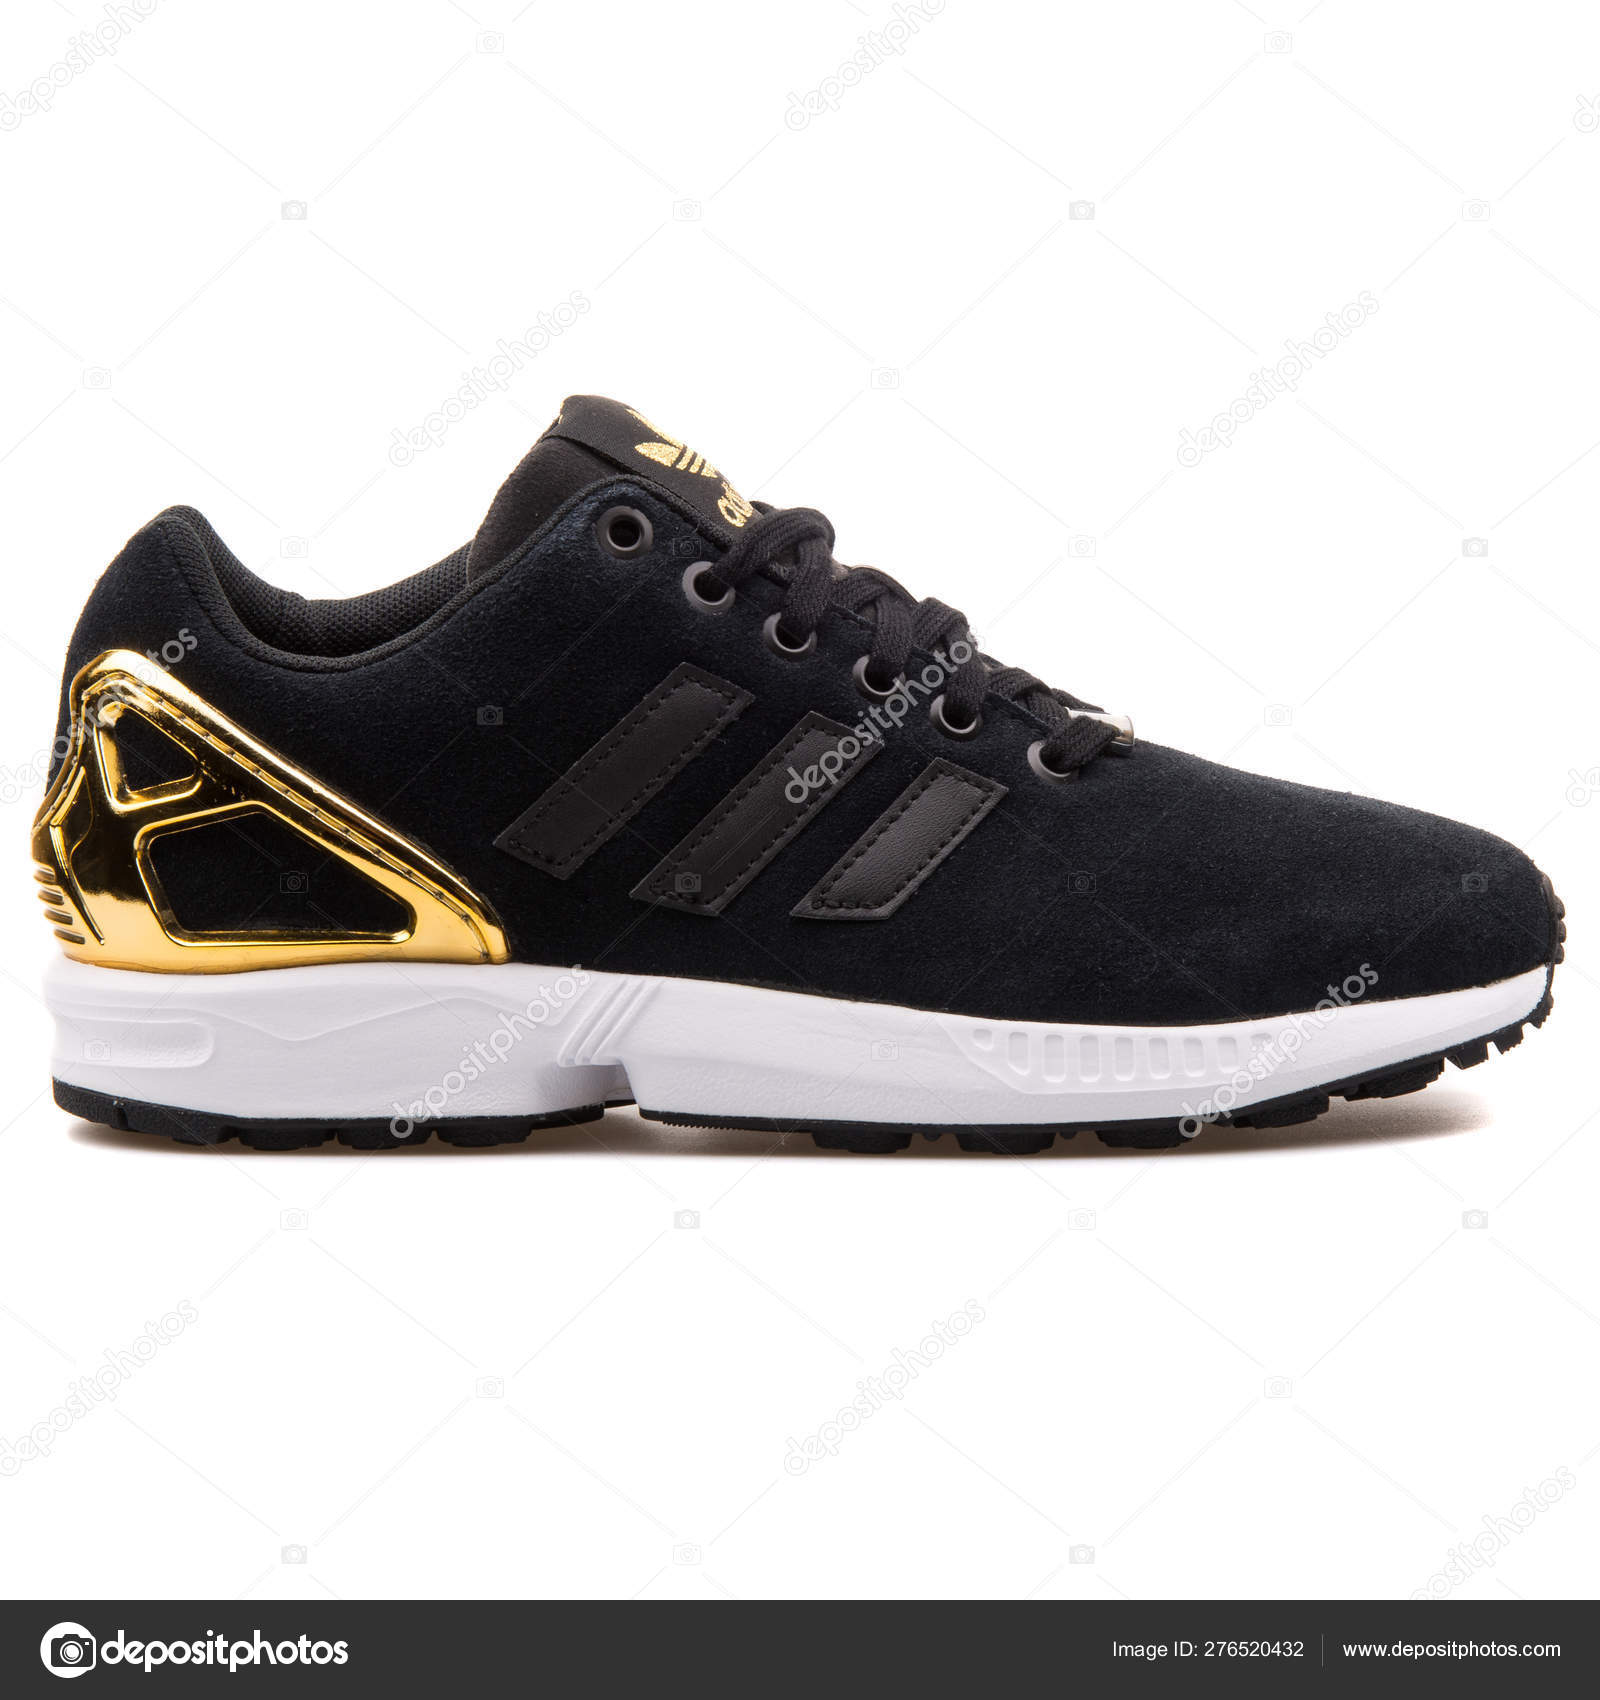 zx flux or